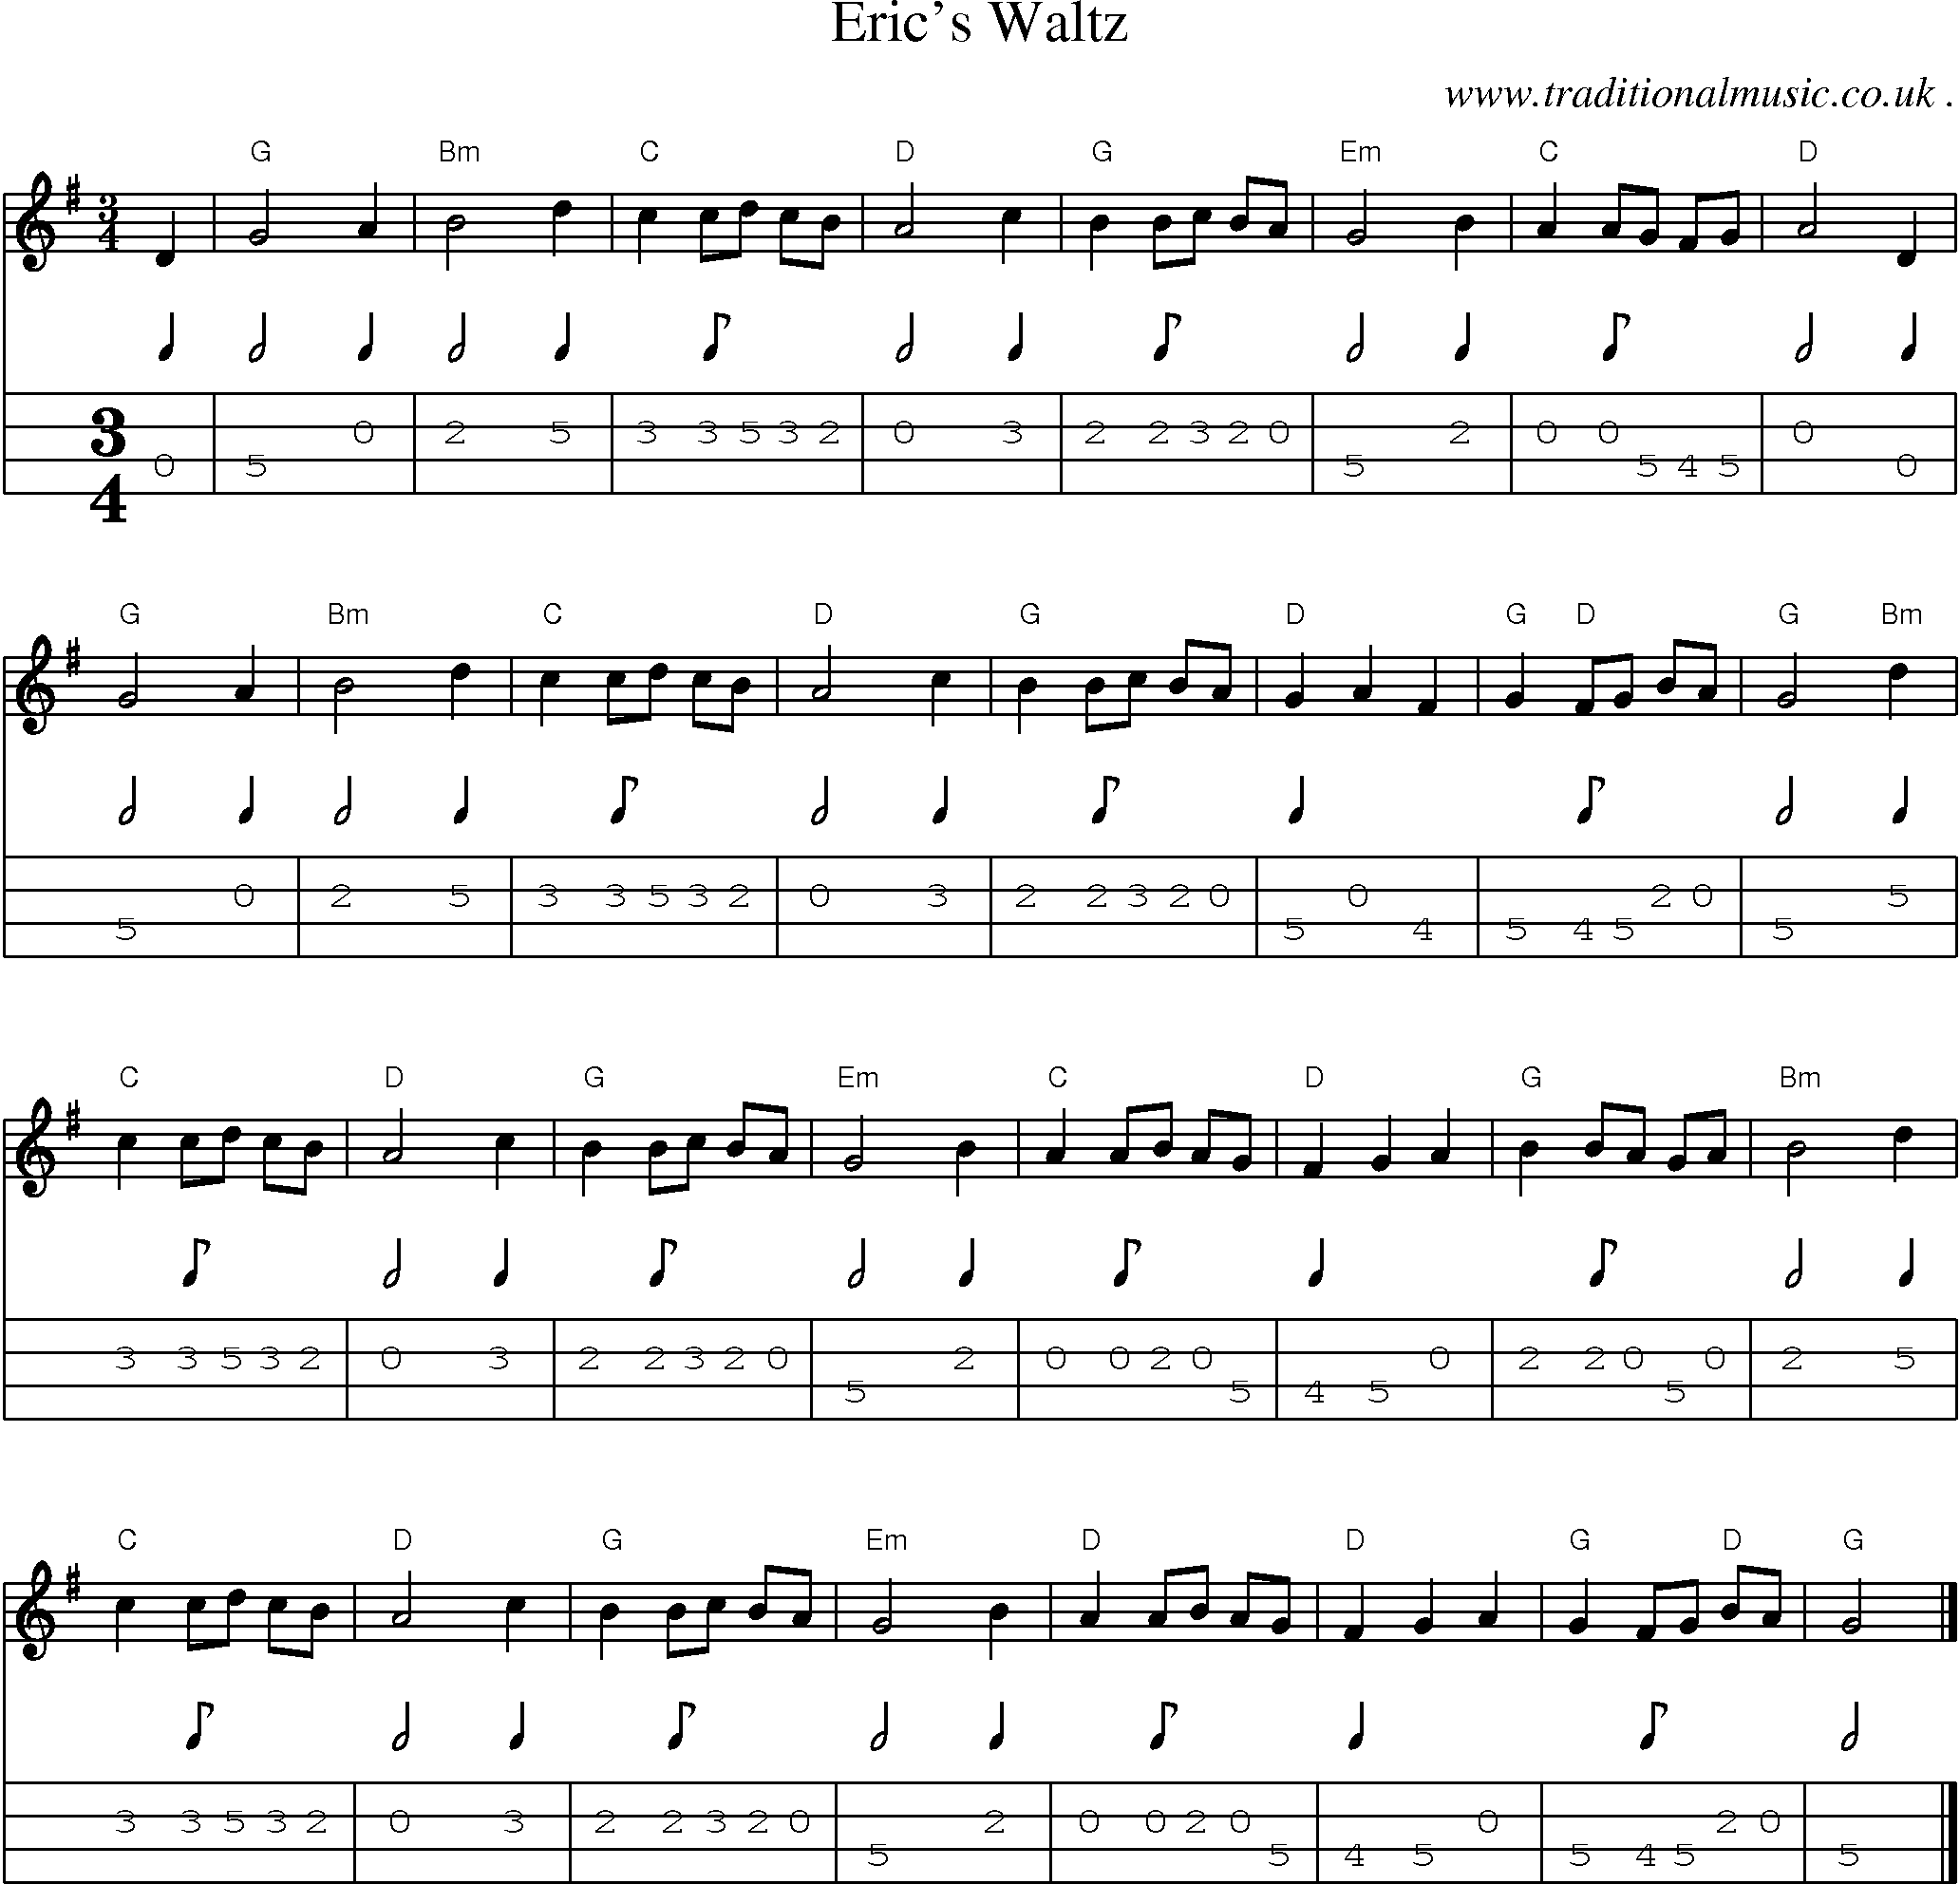 Music Score and Guitar Tabs for Erics Waltz